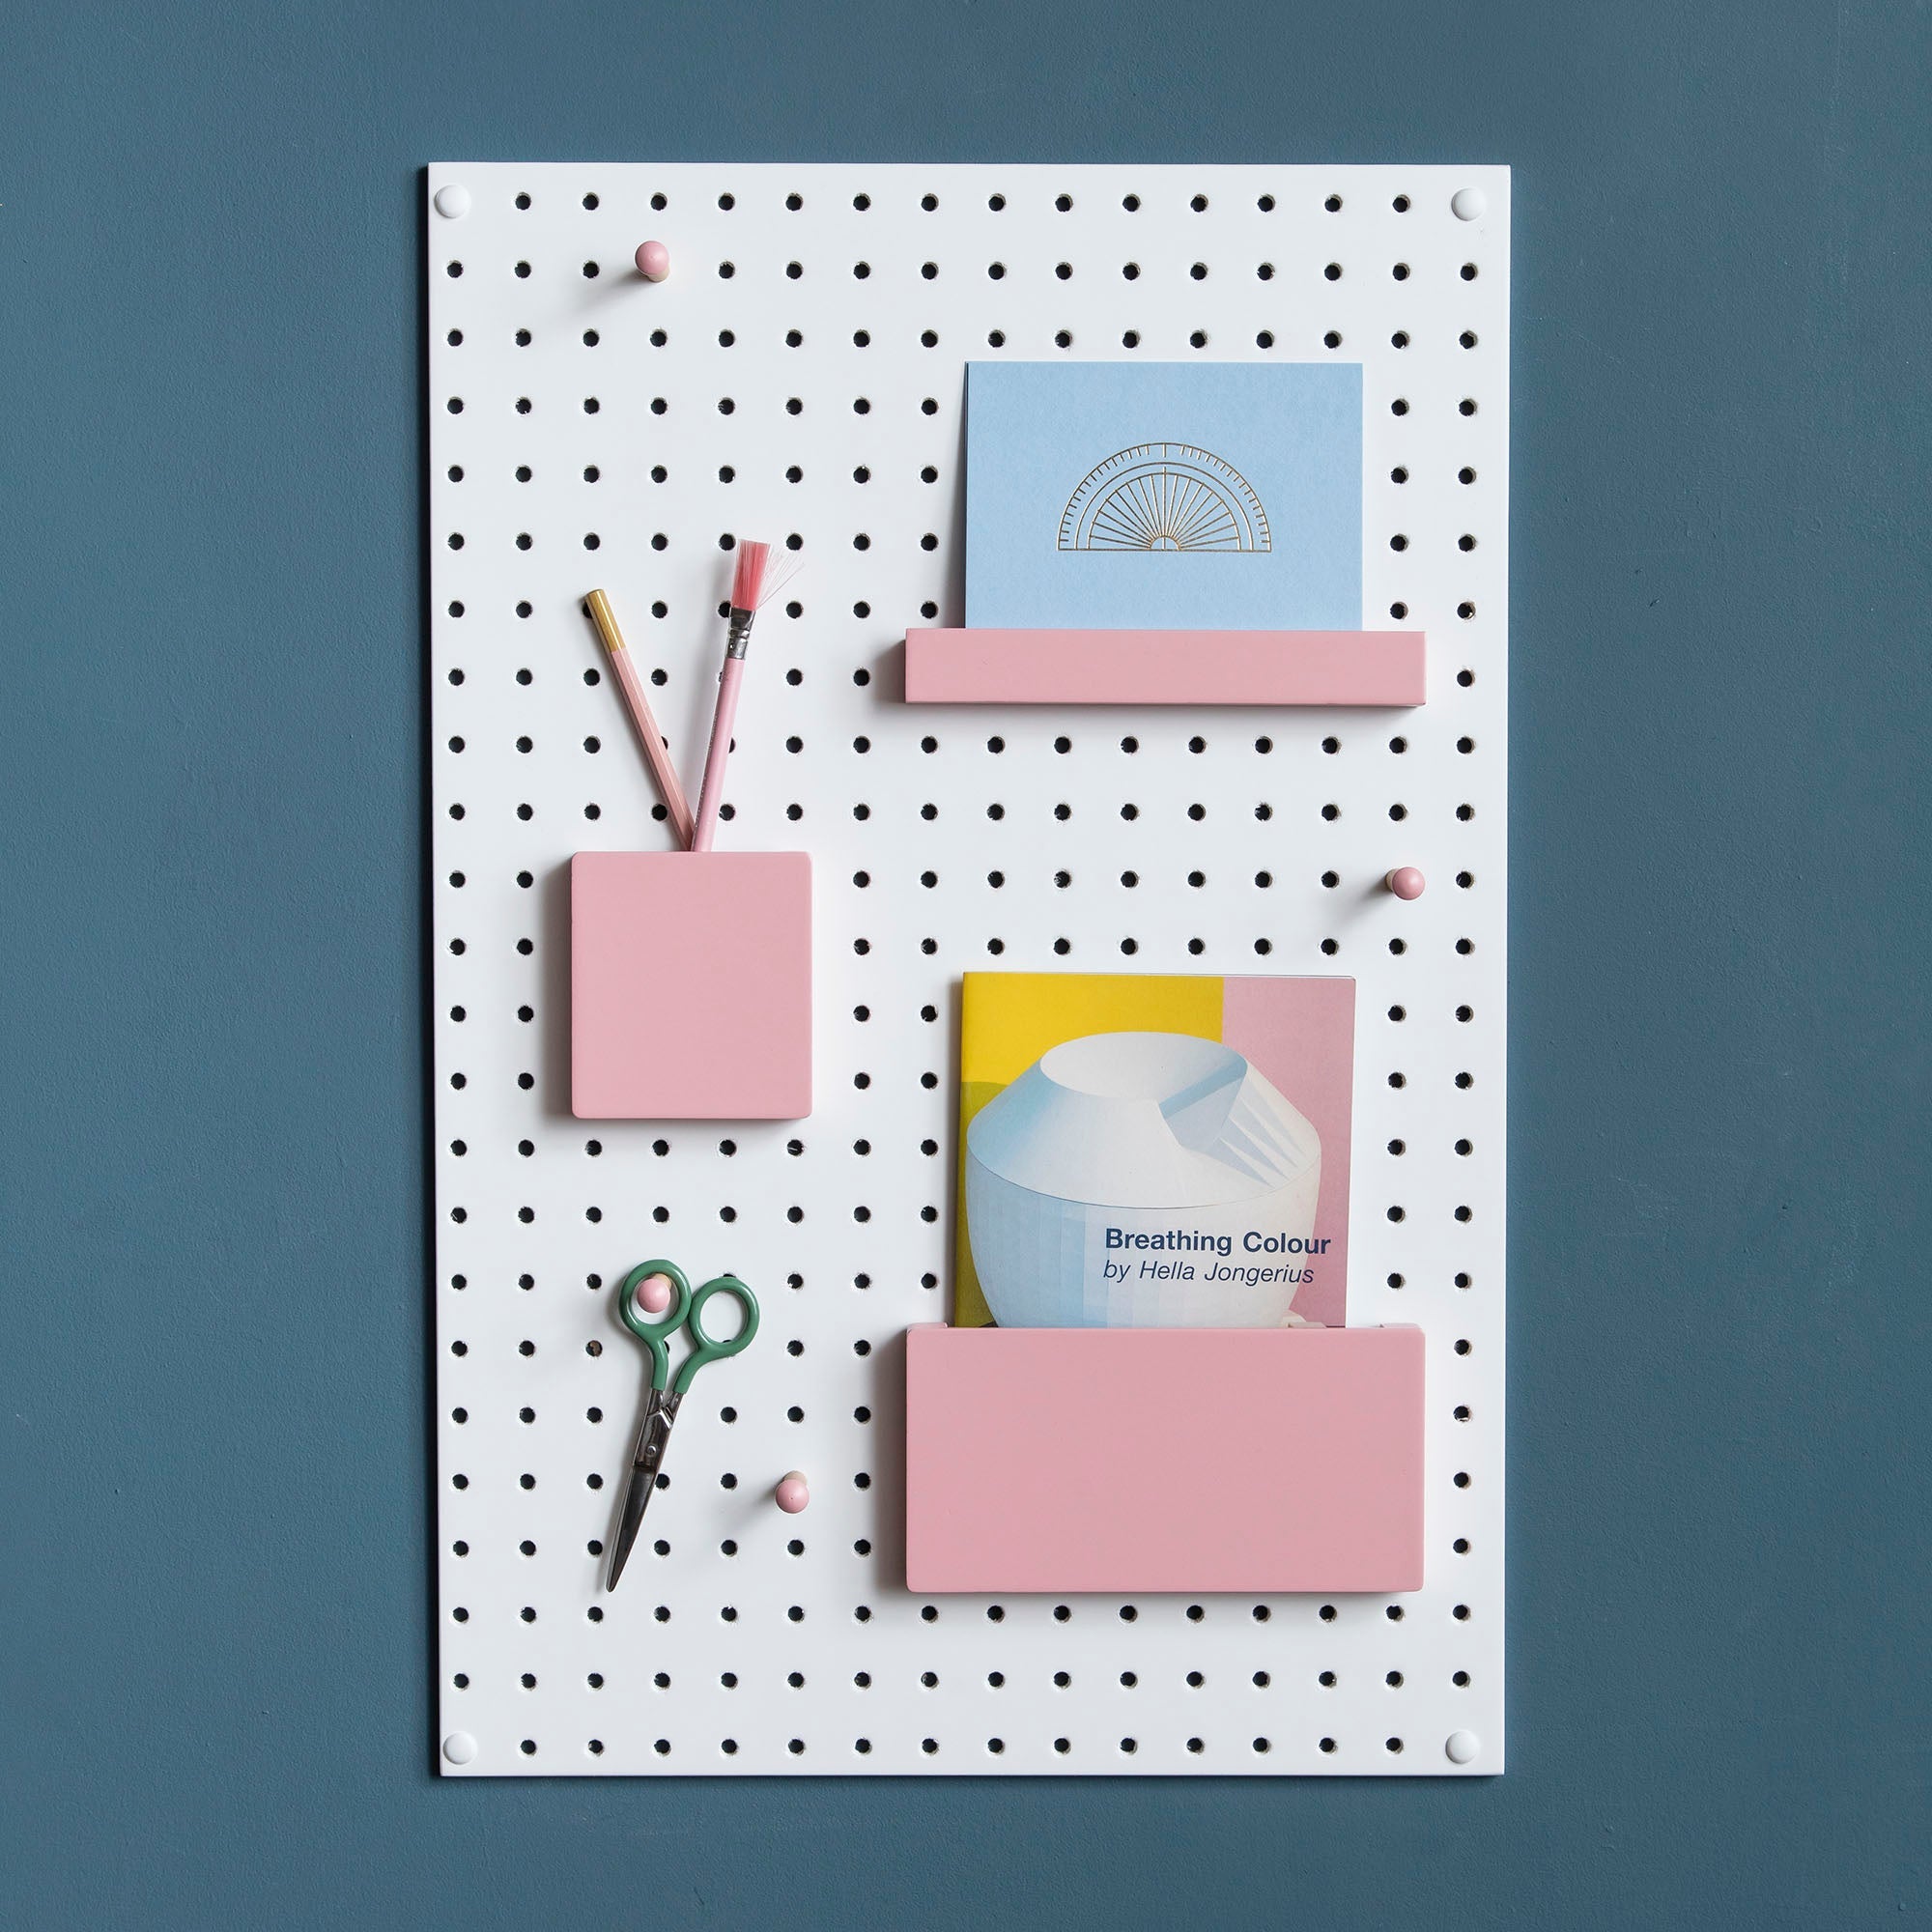 painted pink wooden pegboard accessories on white display pegboard